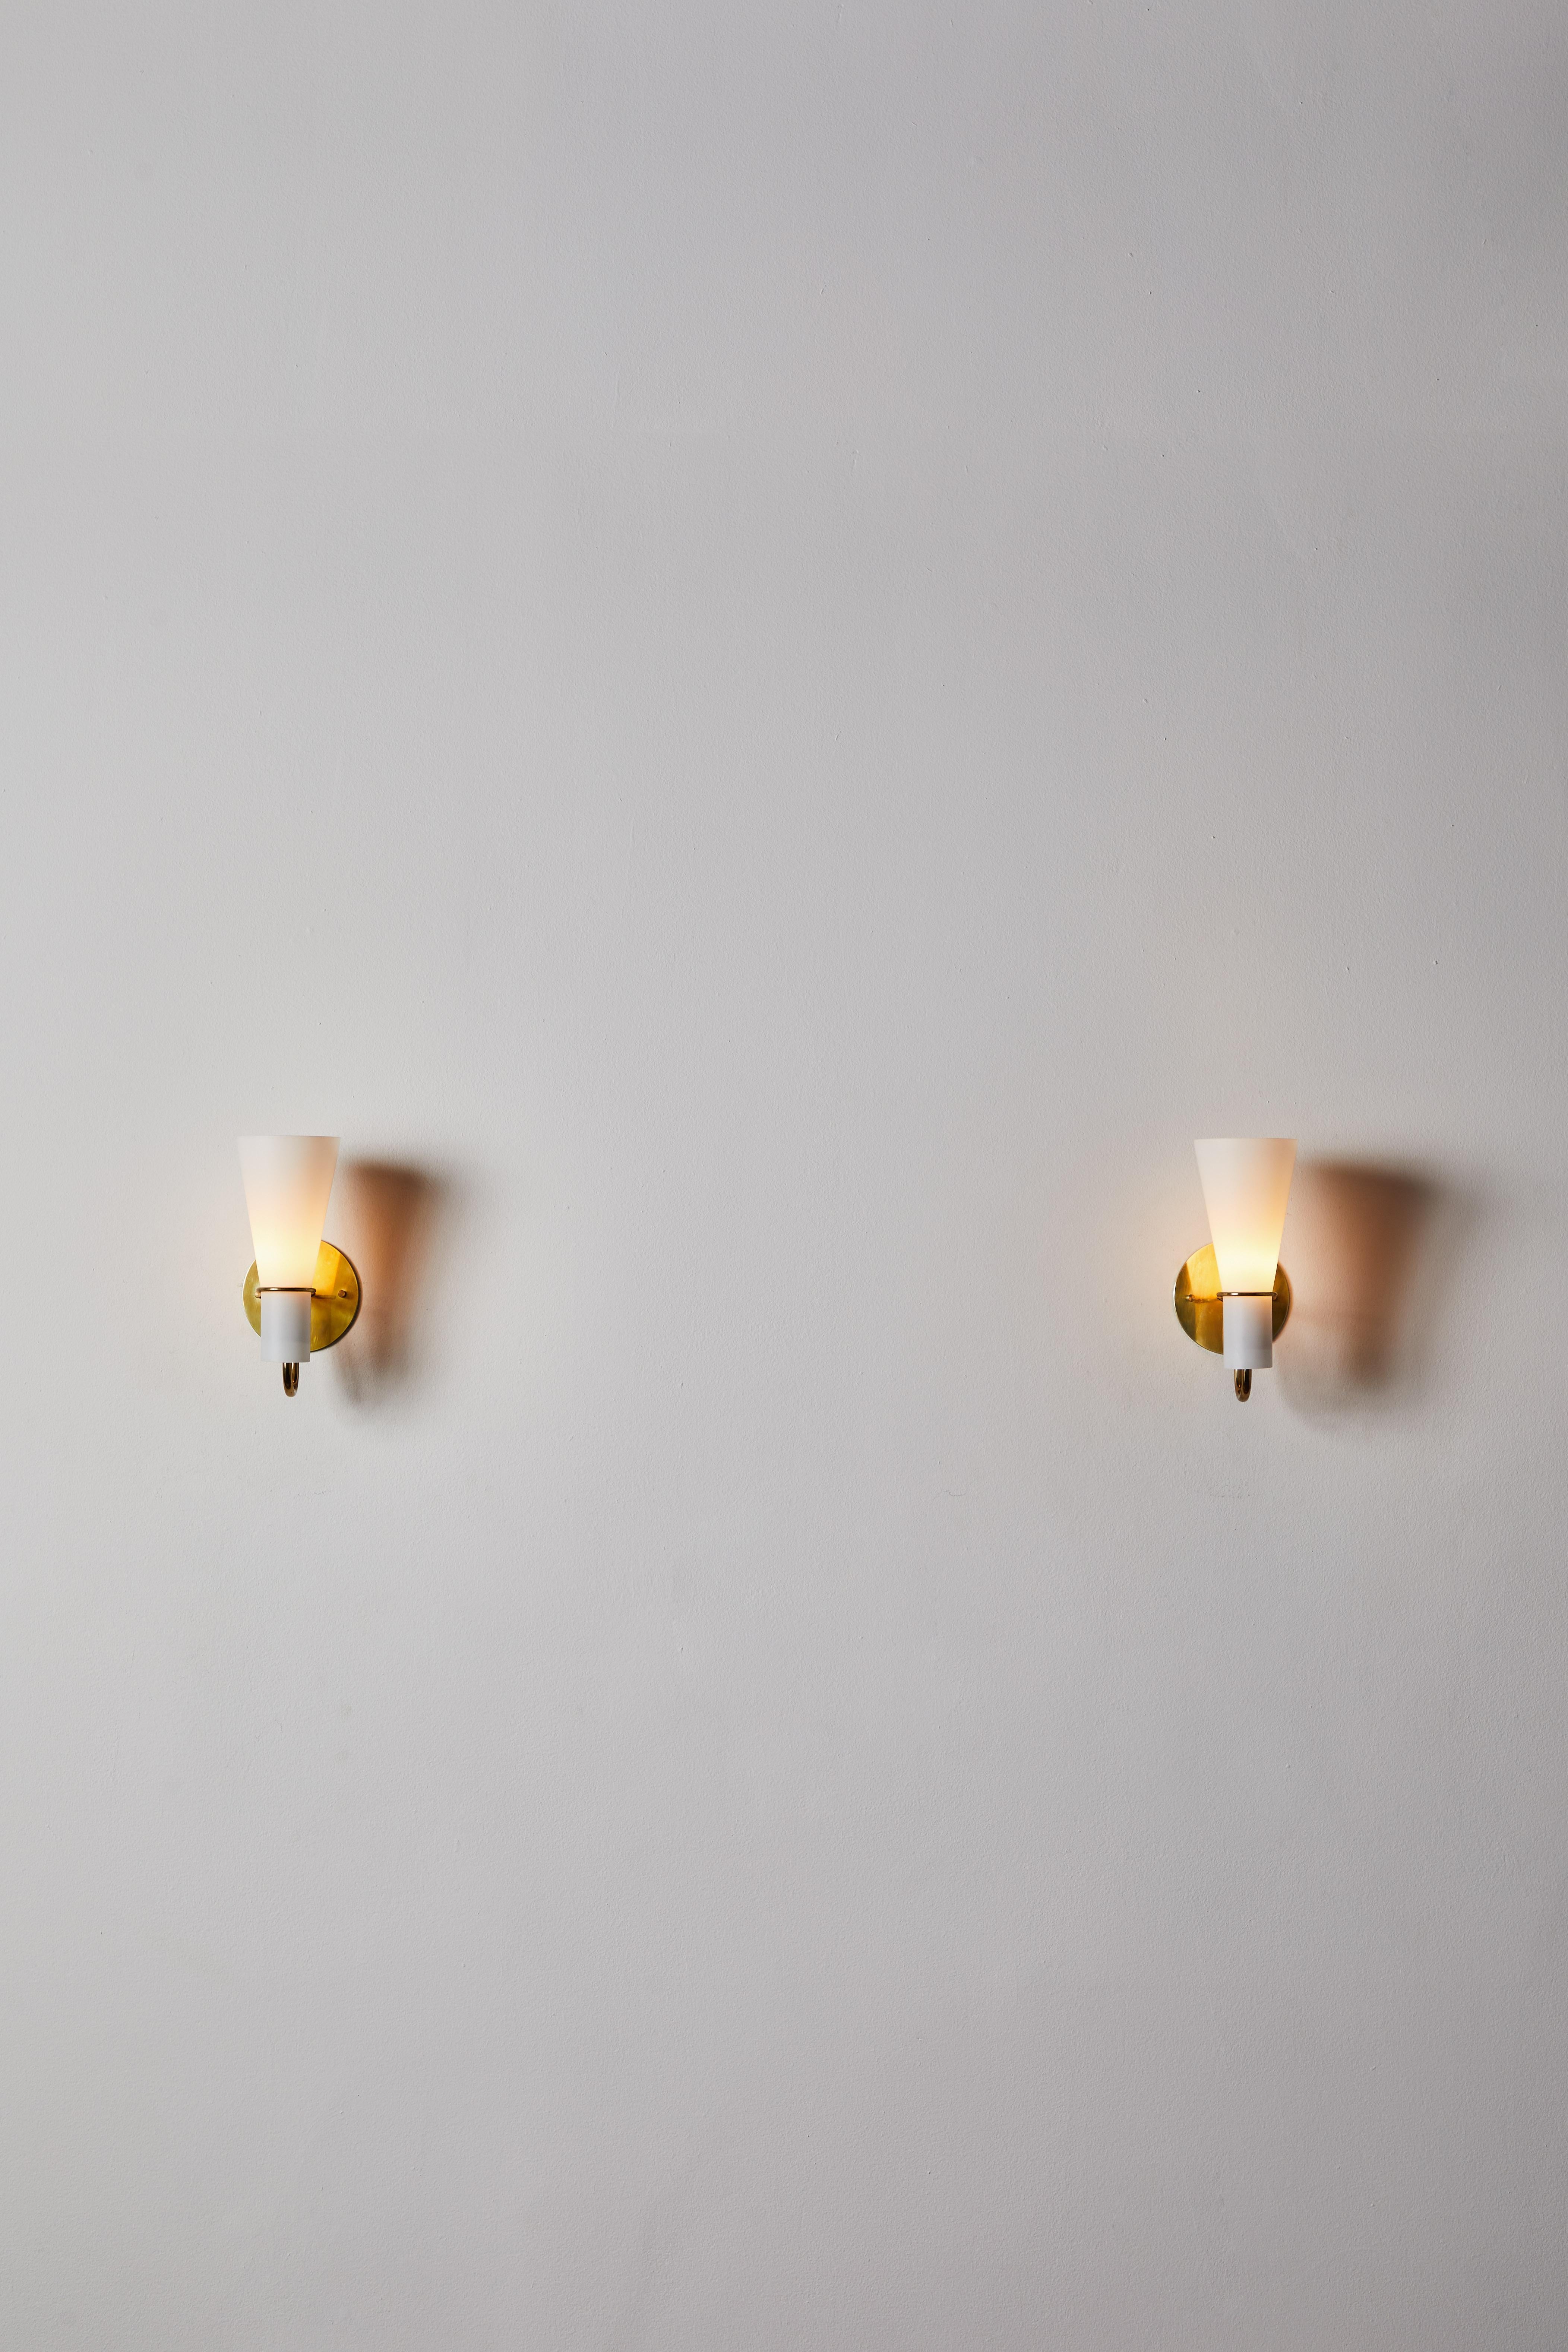 Pair of sconces by Hans Bergström. Designed and manufactured in Sweden, circa 1950s. Brushed satin glass diffuser, brass hardware. Custom brass backplates. Rewired for U.S. standards.
We recommend one E14 60w maximum European candelabra bulbs per